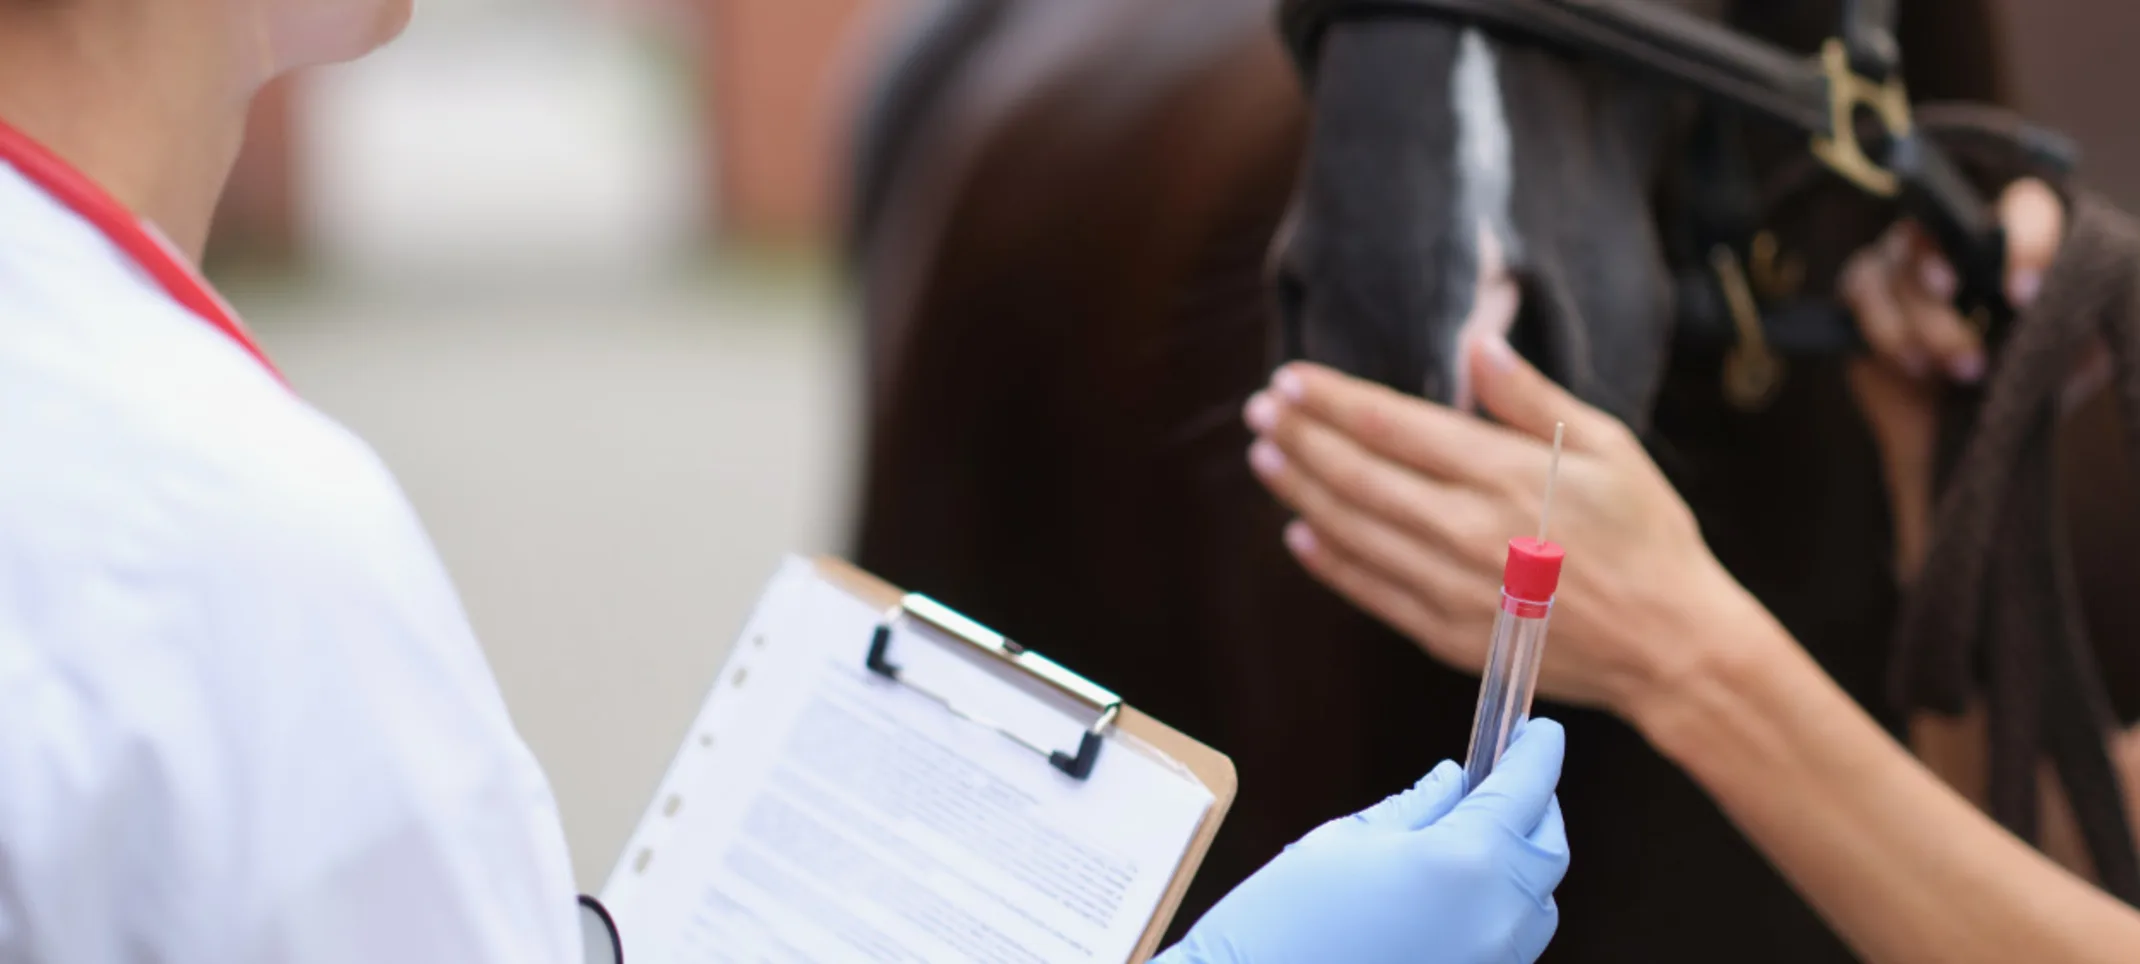 Two veterinarians examine horse and take biological sample